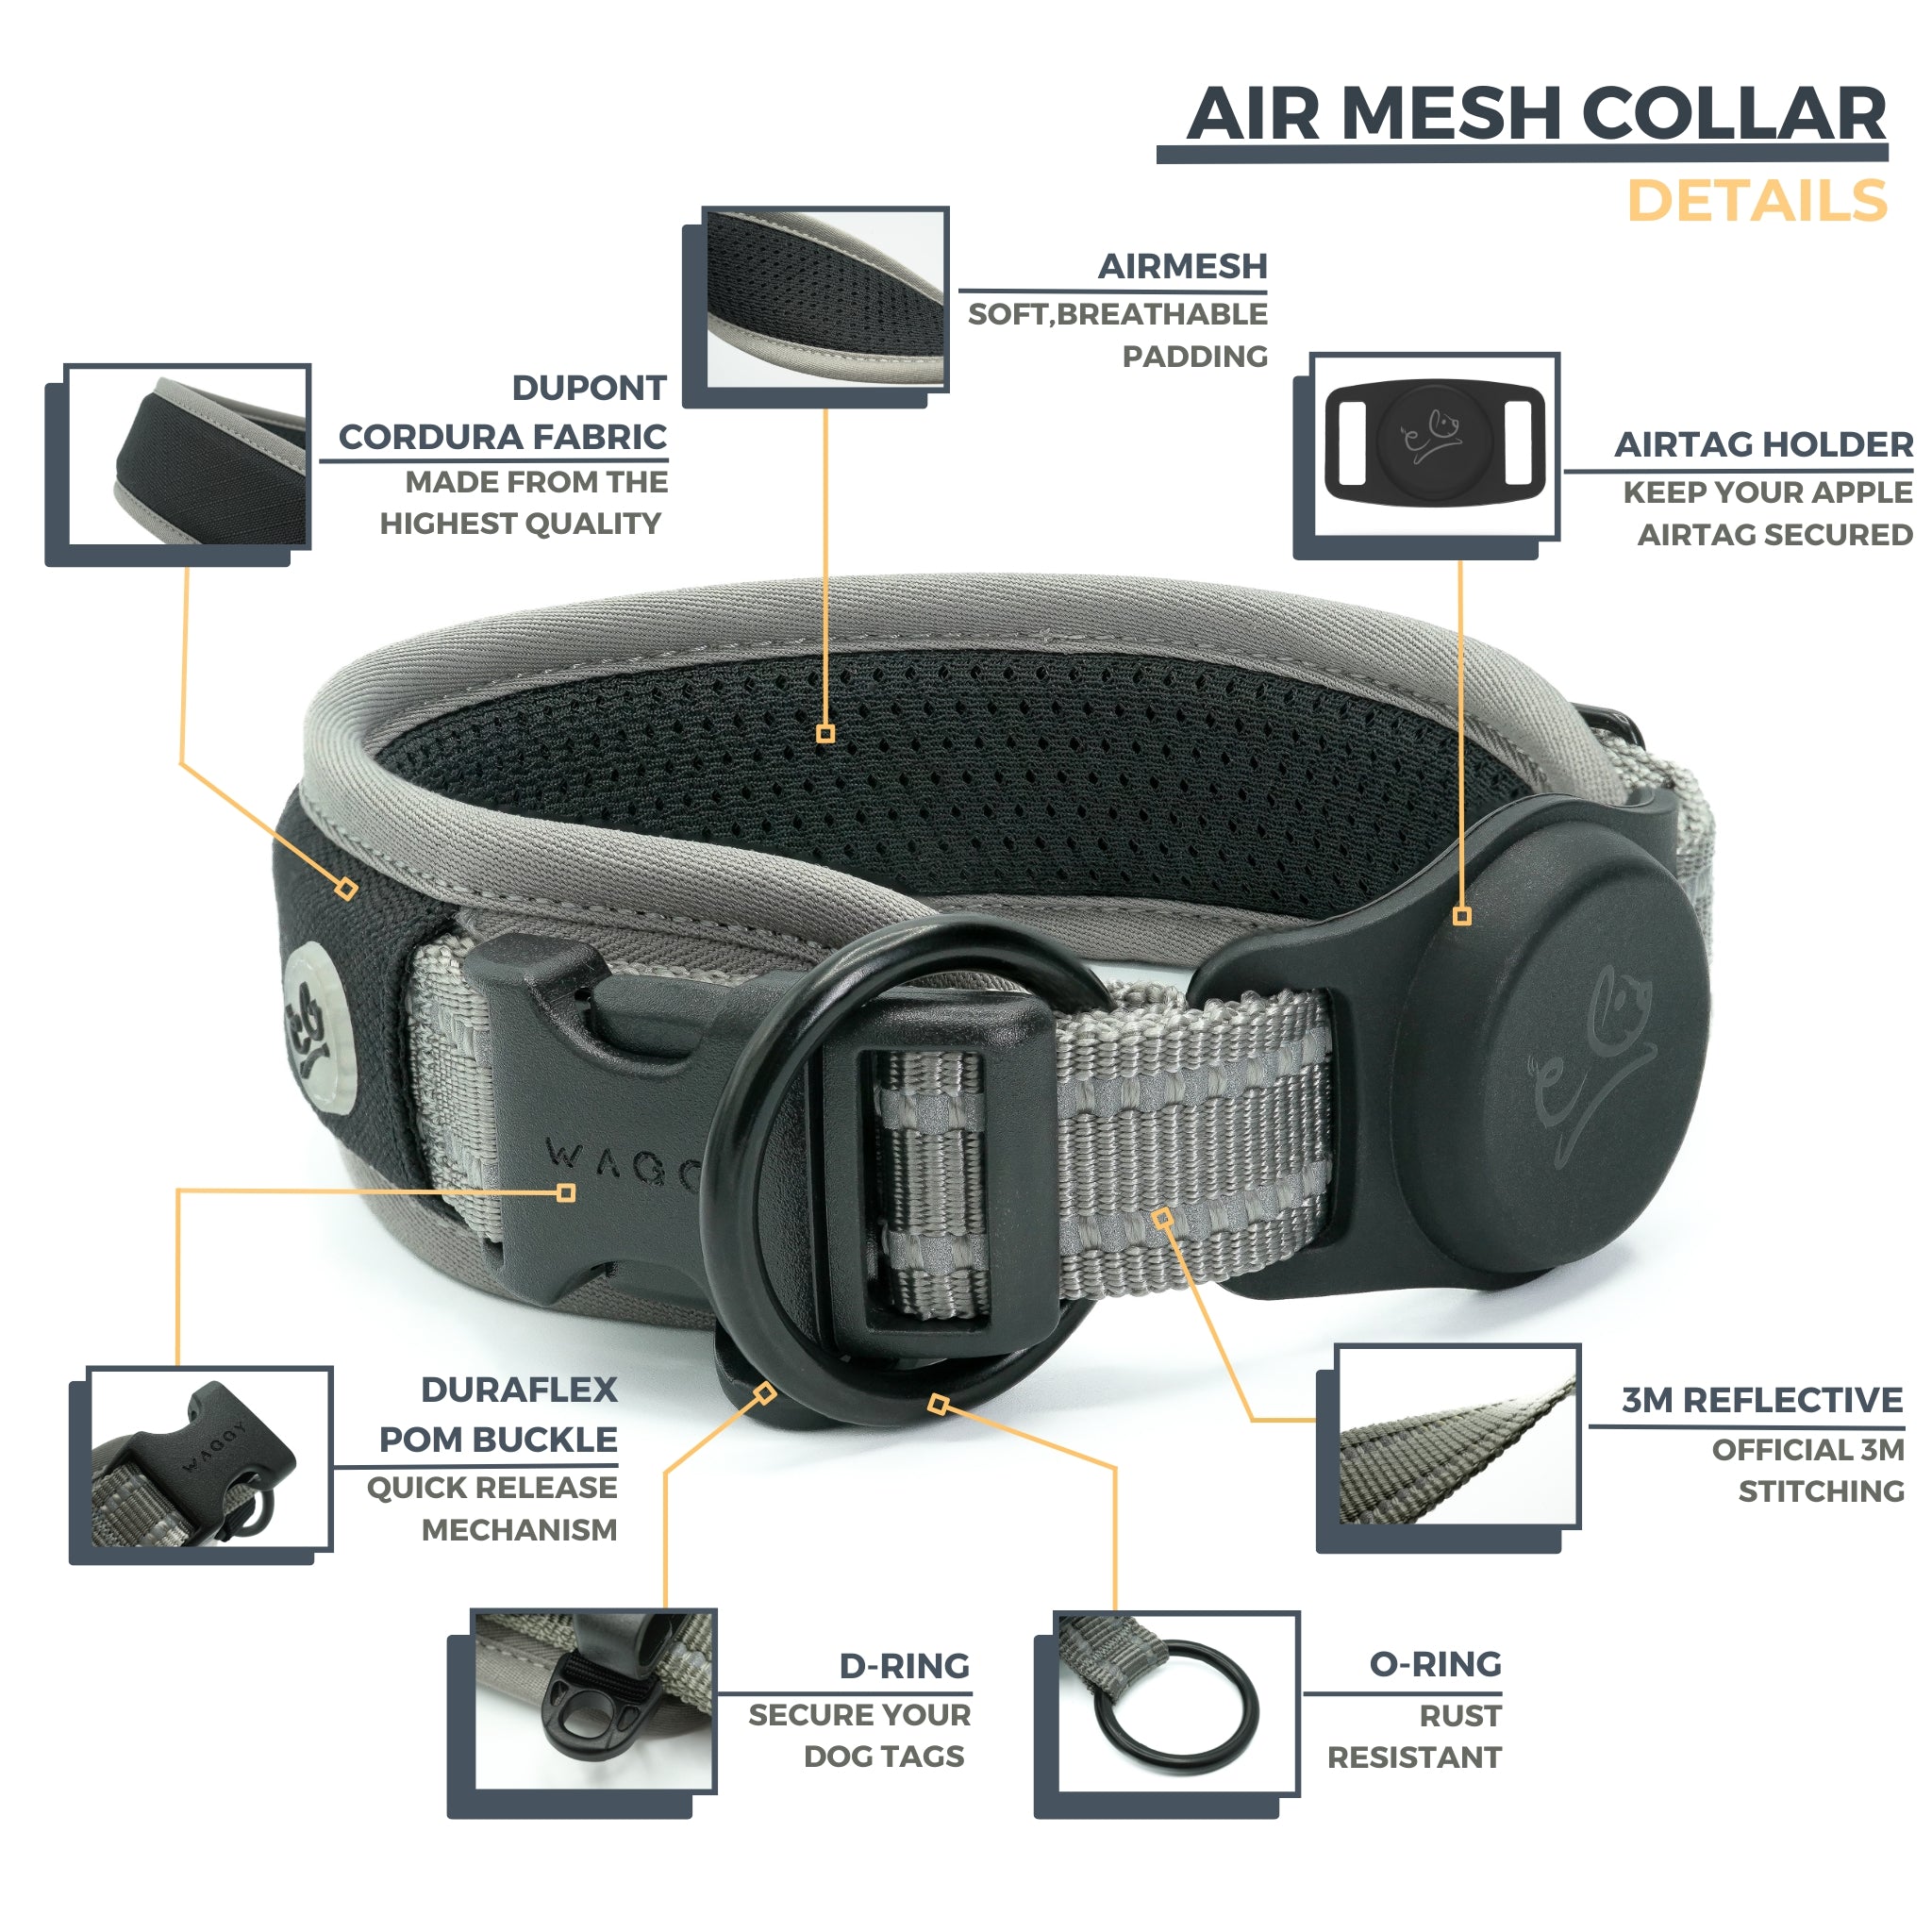 7 features &amp; details regarding Grey Air Mesh dog collar. Dupont Cordura Fabric; Air Mesh padding; Airtag Holder; Duraflex buckle; D-ring; O-ring; 3M Reflective stitching with short description and close up images.